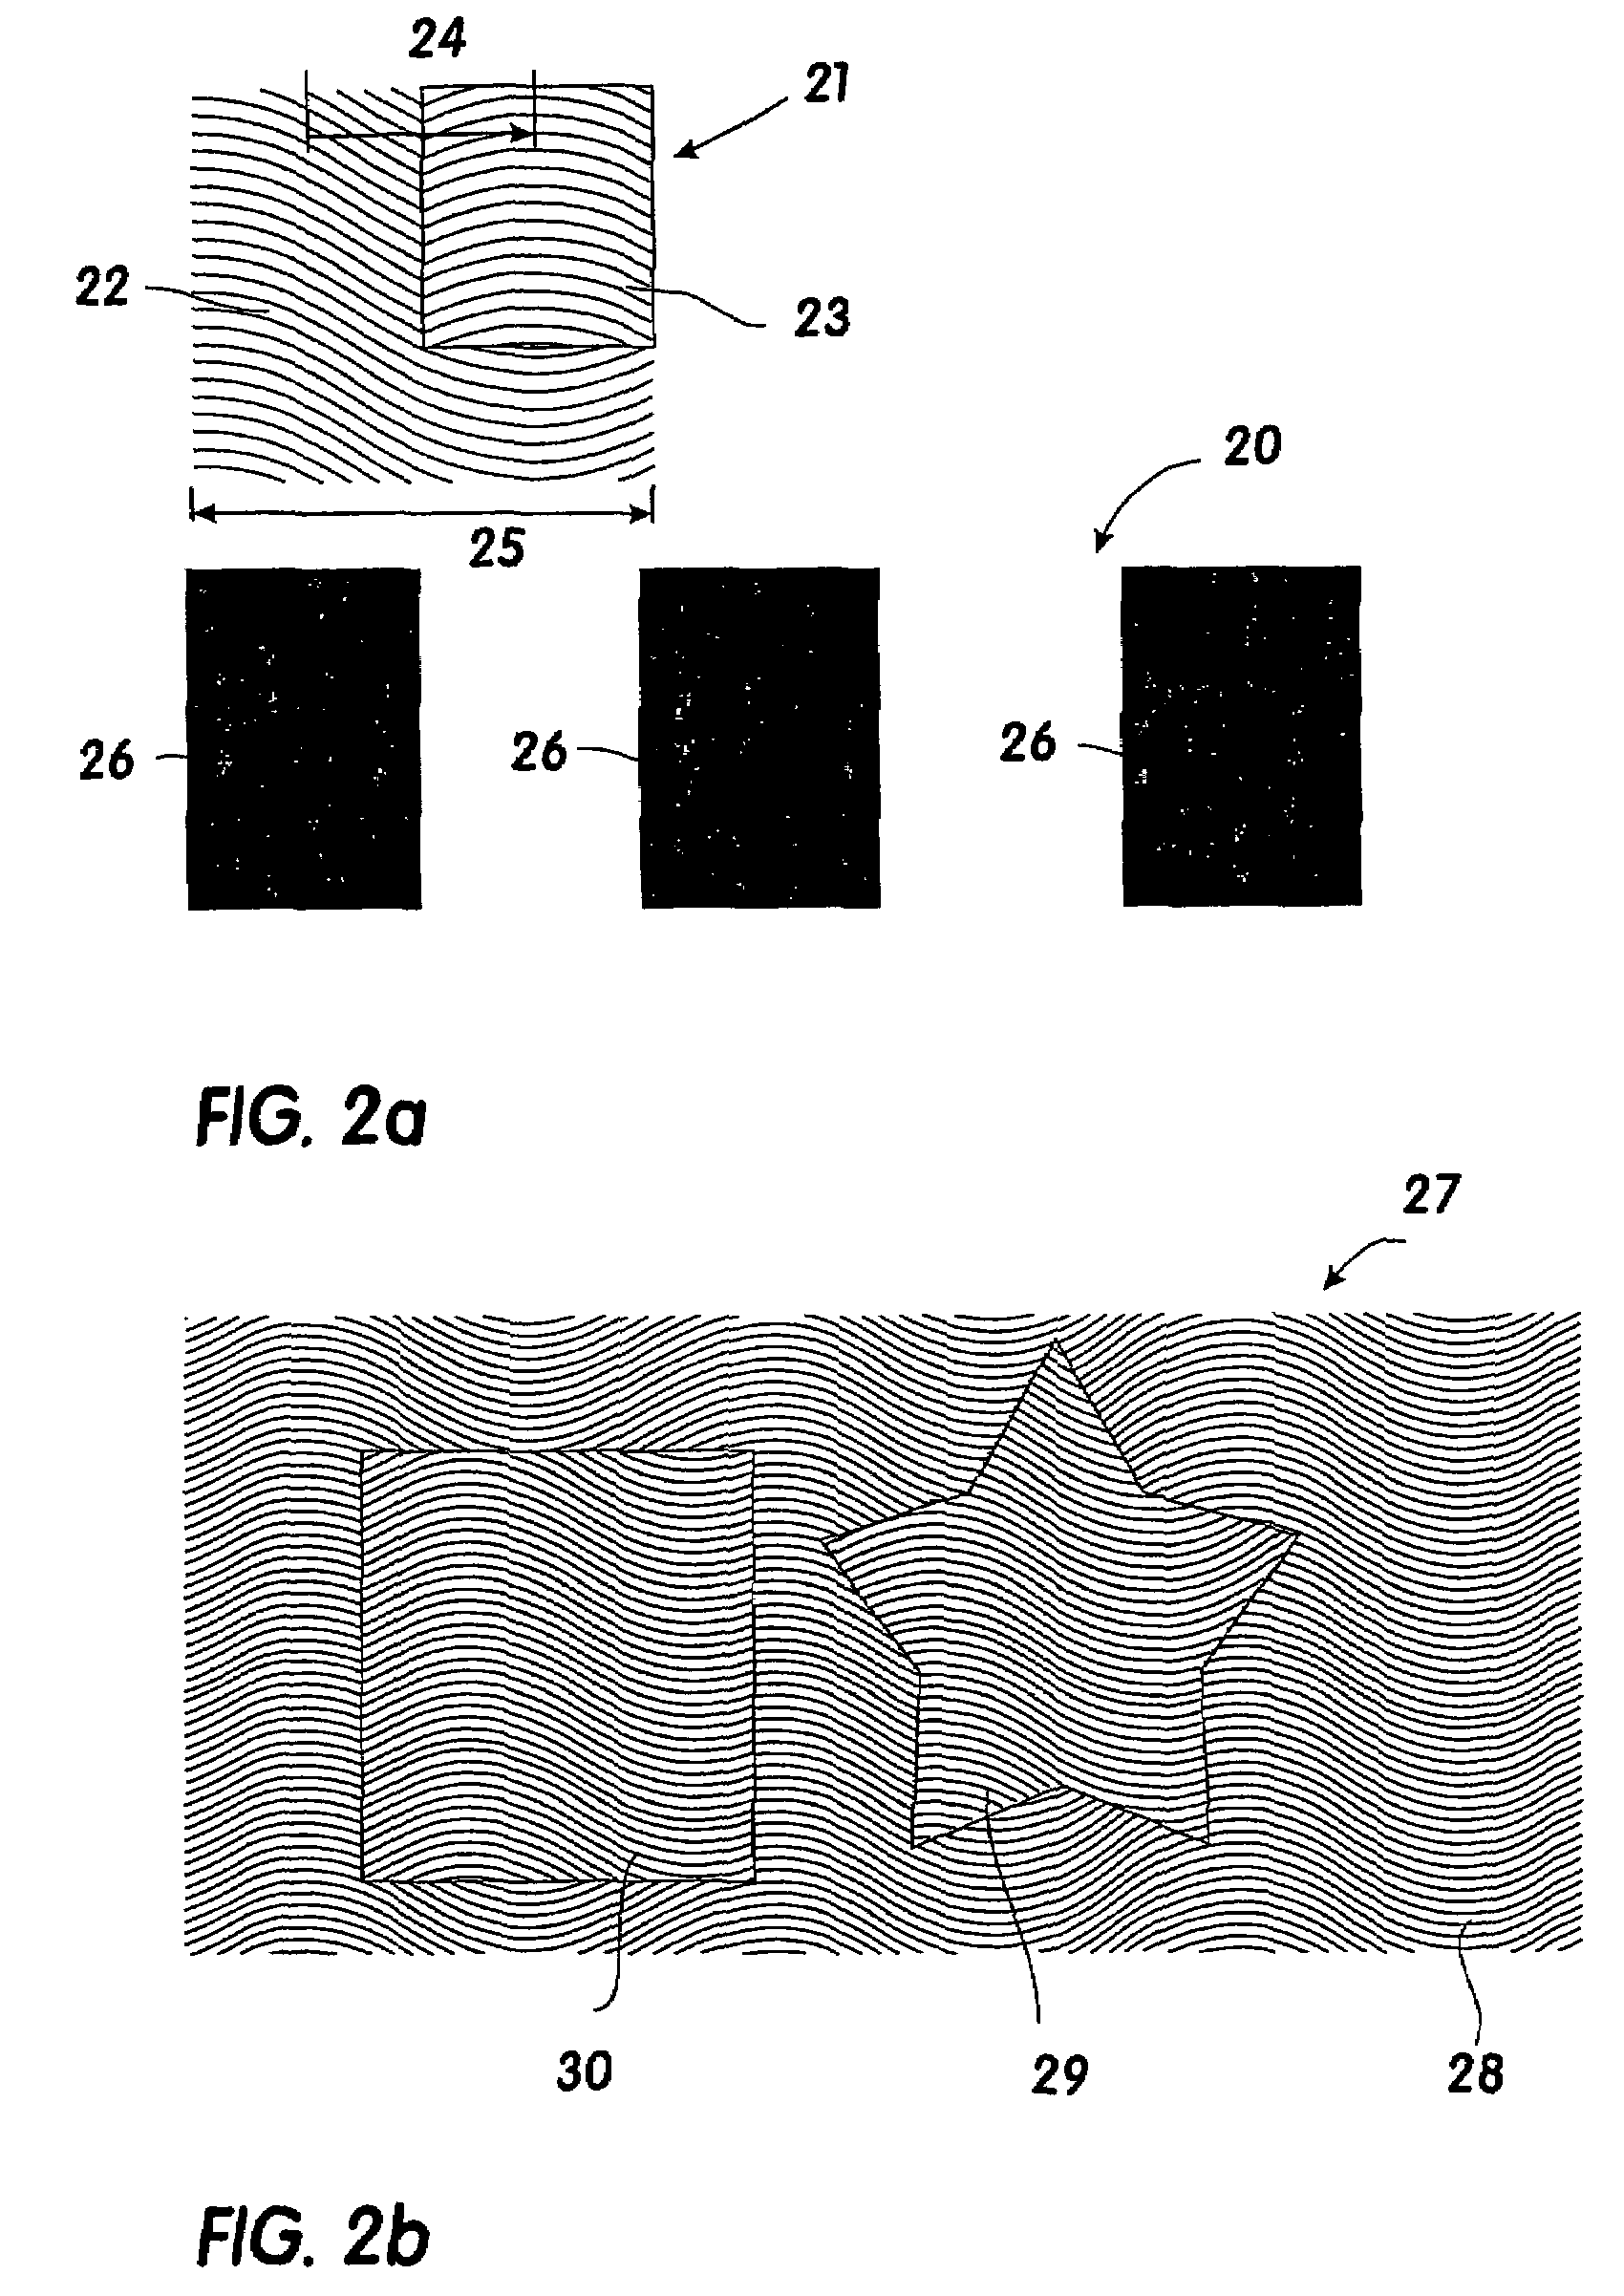 Optical safety element and system for visualising hidden information